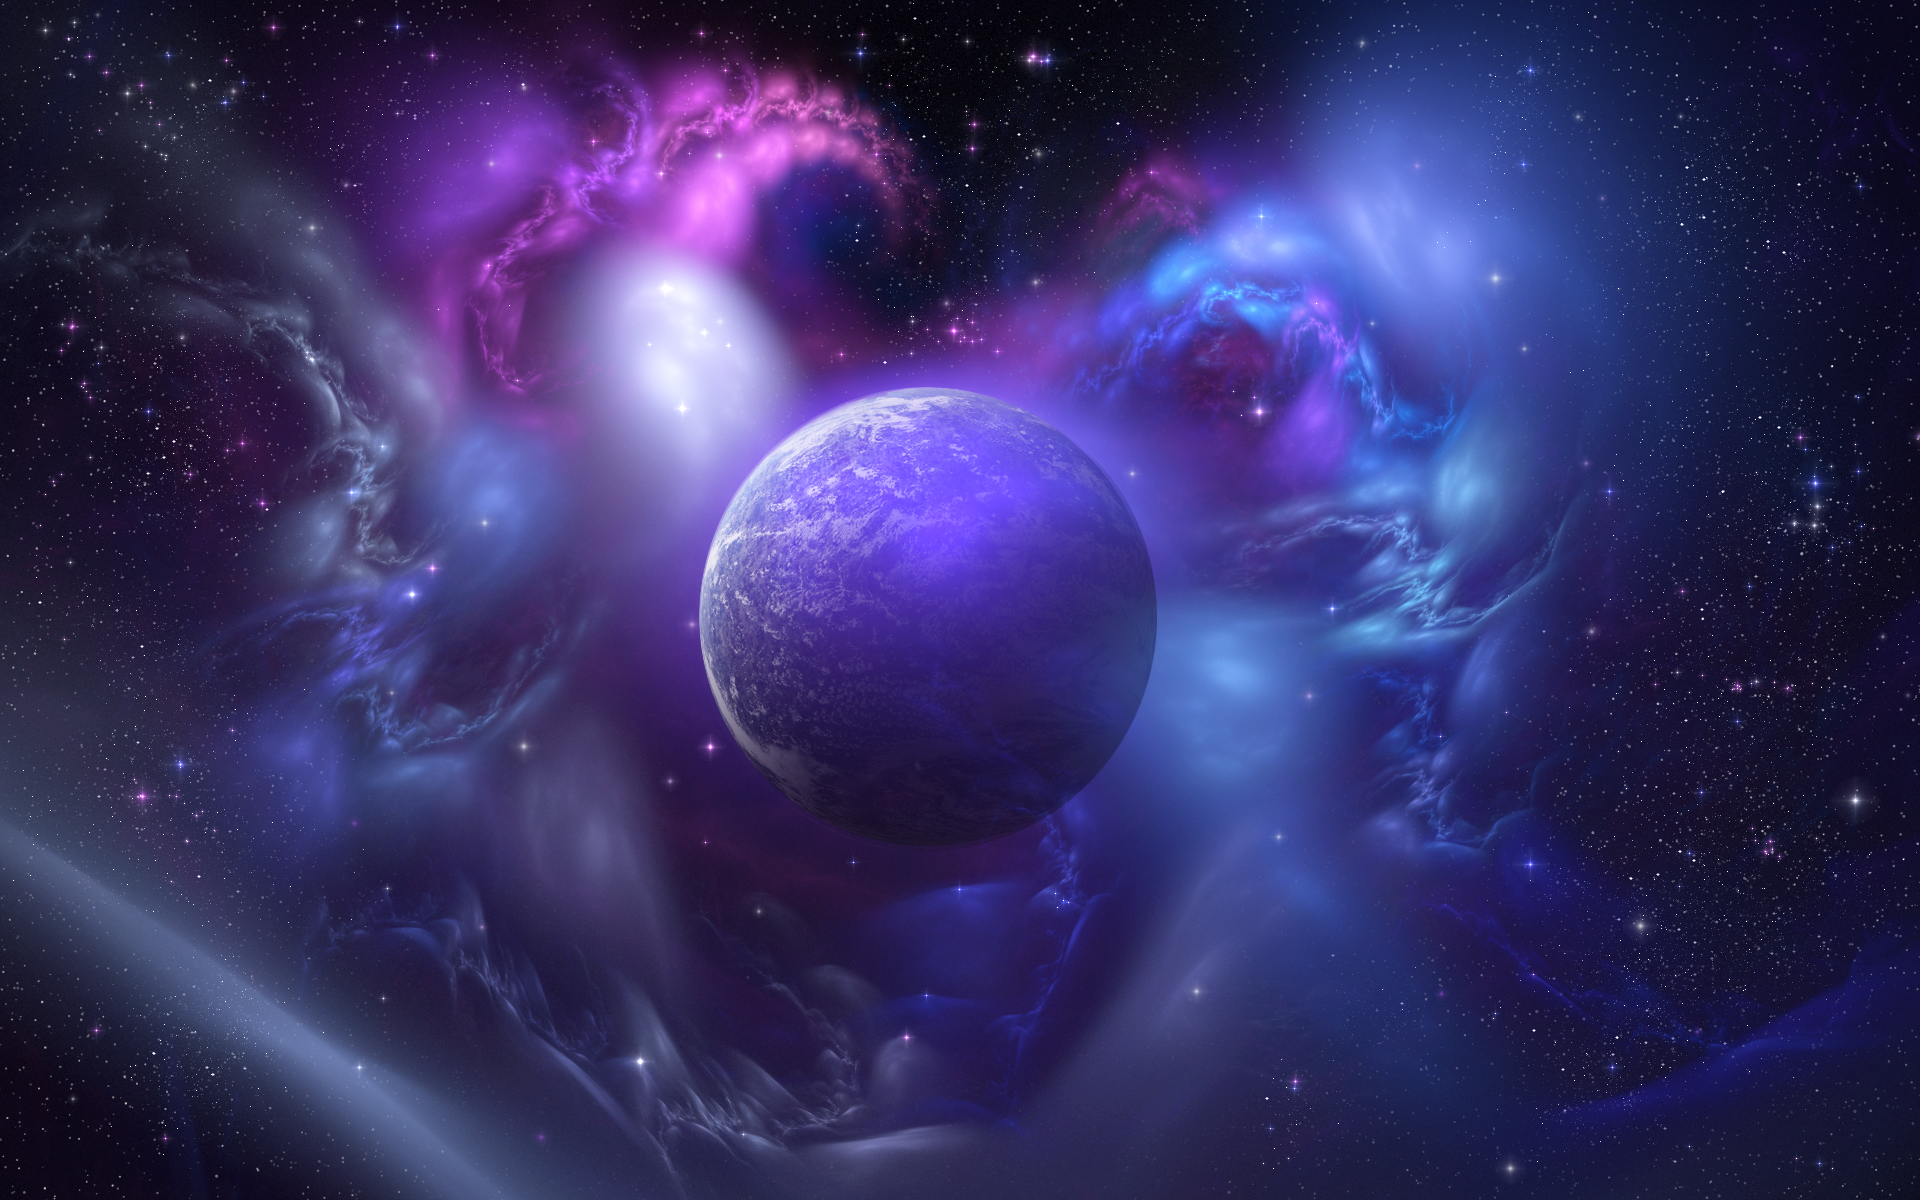 outer space, stars, planets, XÃÂ°BALBA - desktop wallpaper